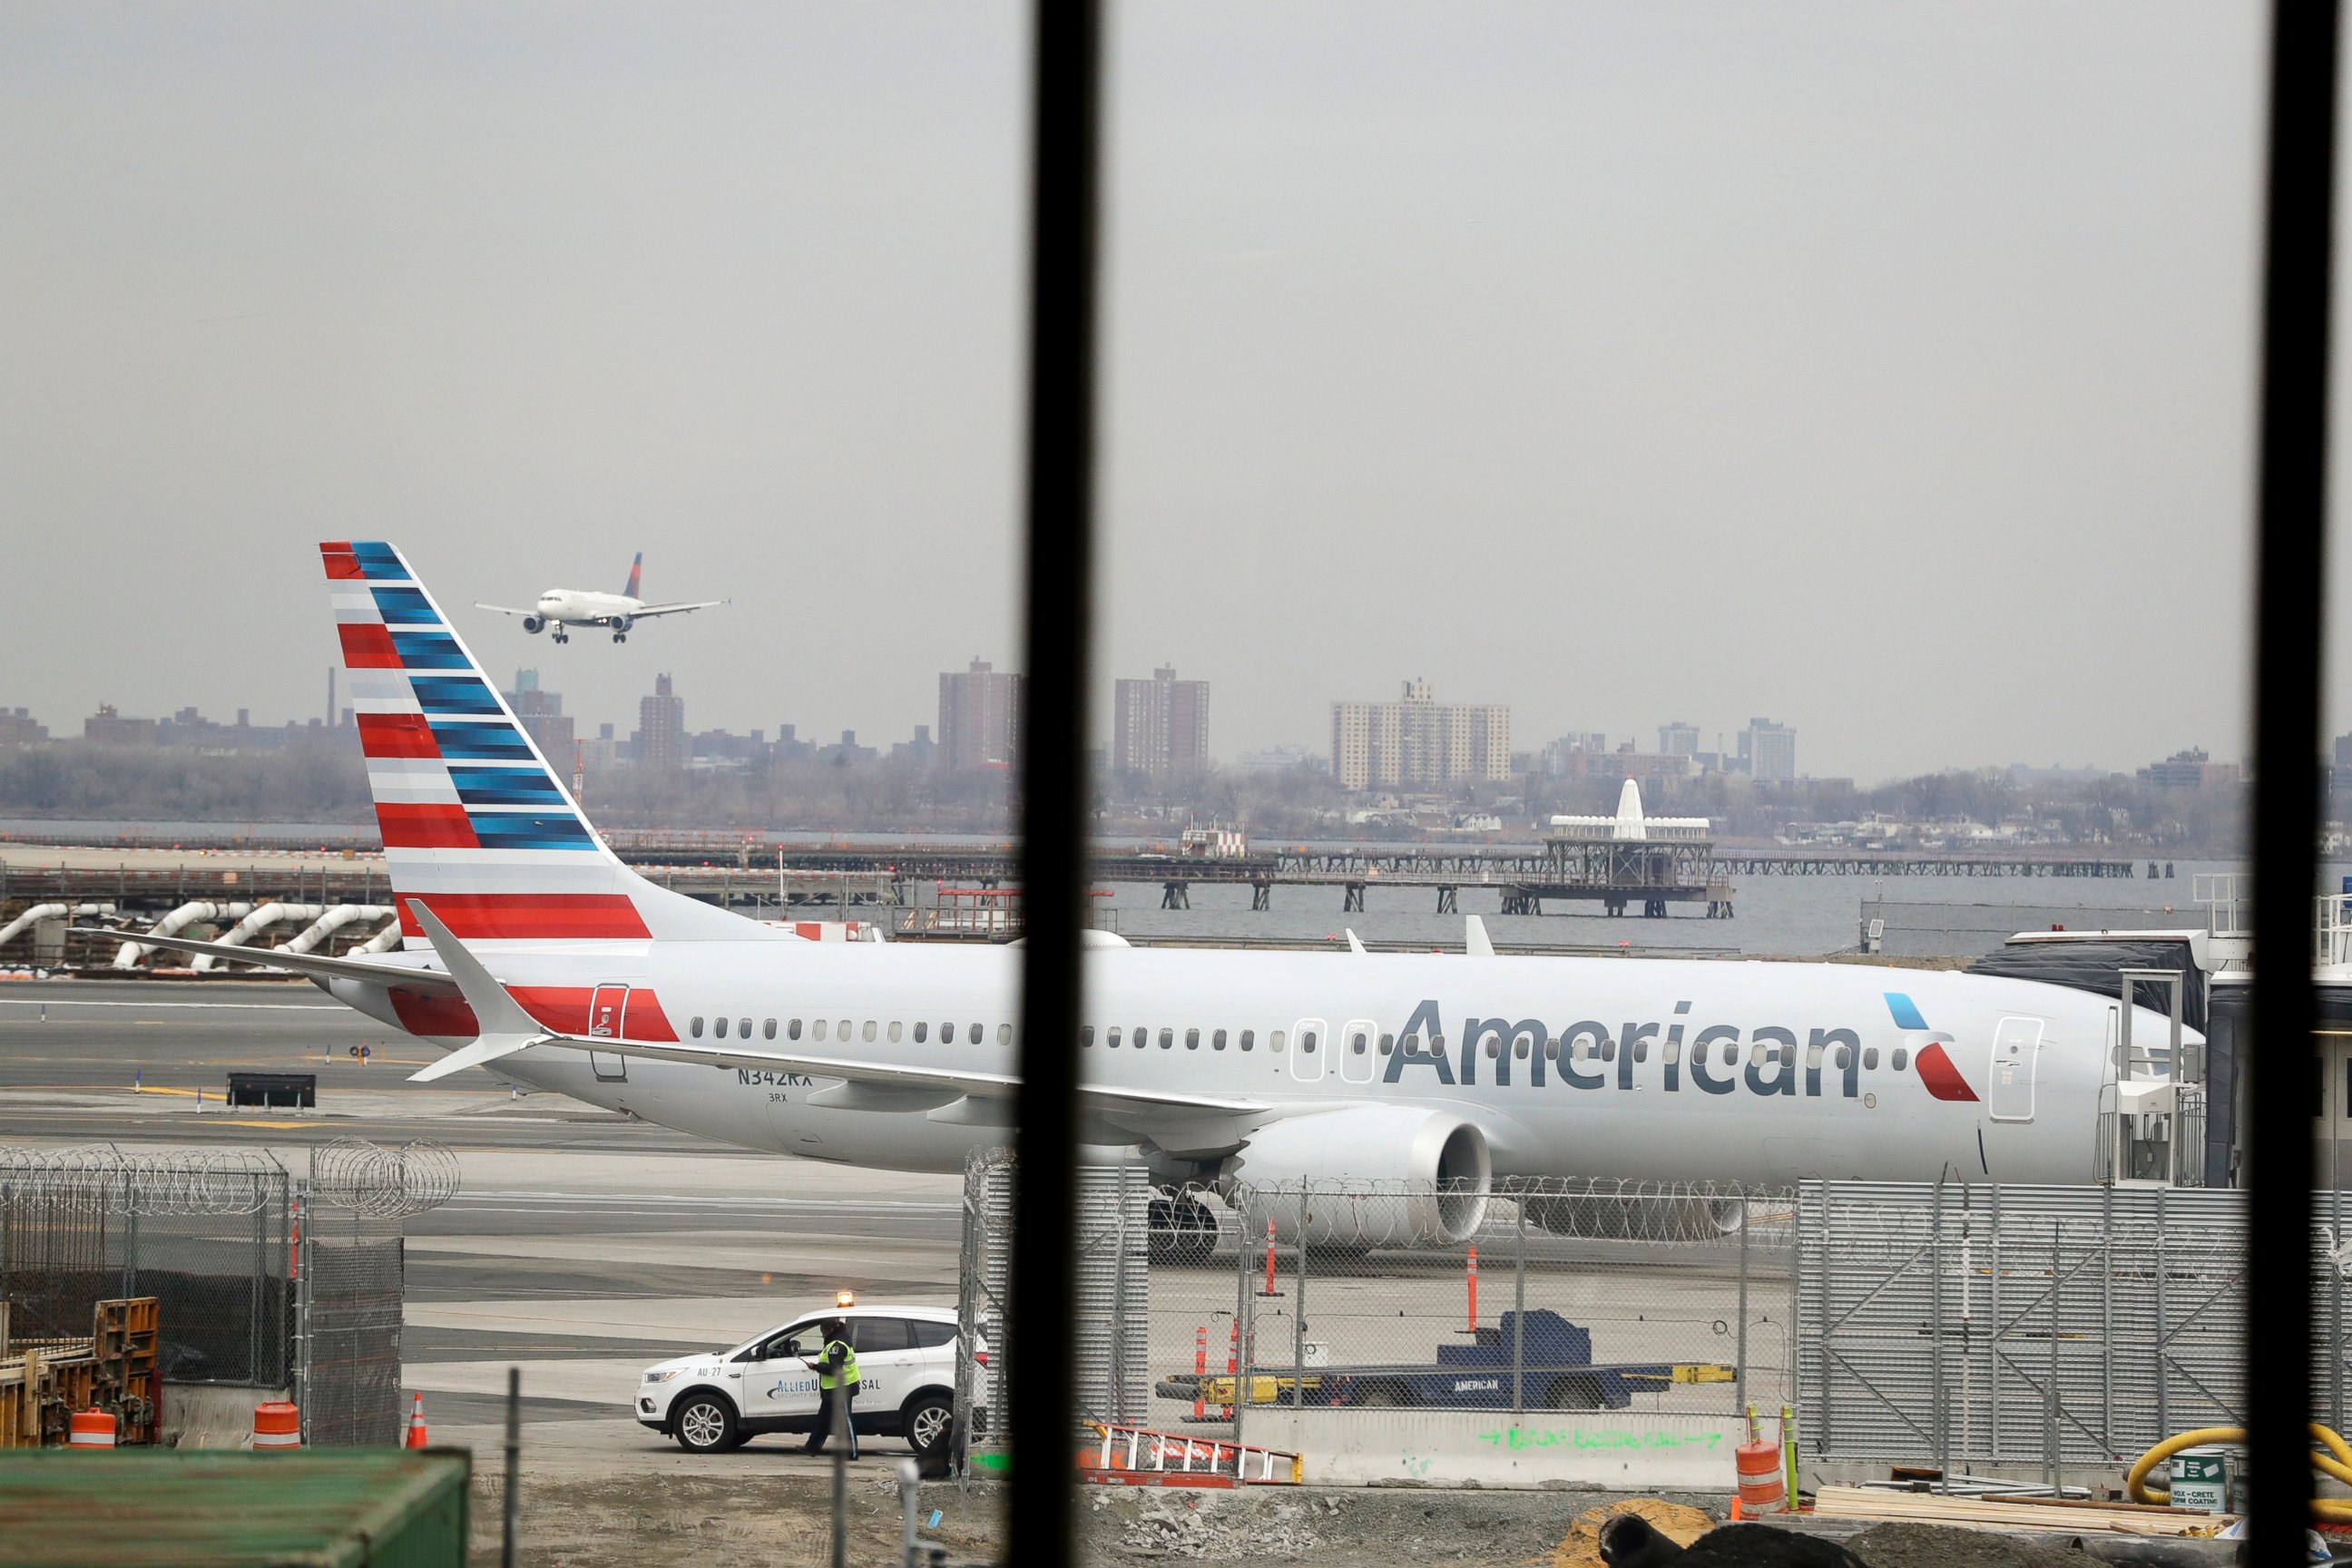 PHOTO: In a March 13, 2019 file photo, an American Airlines Boeing 737 MAX 8 sits at a boarding gate at LaGuardia Airport in New York.